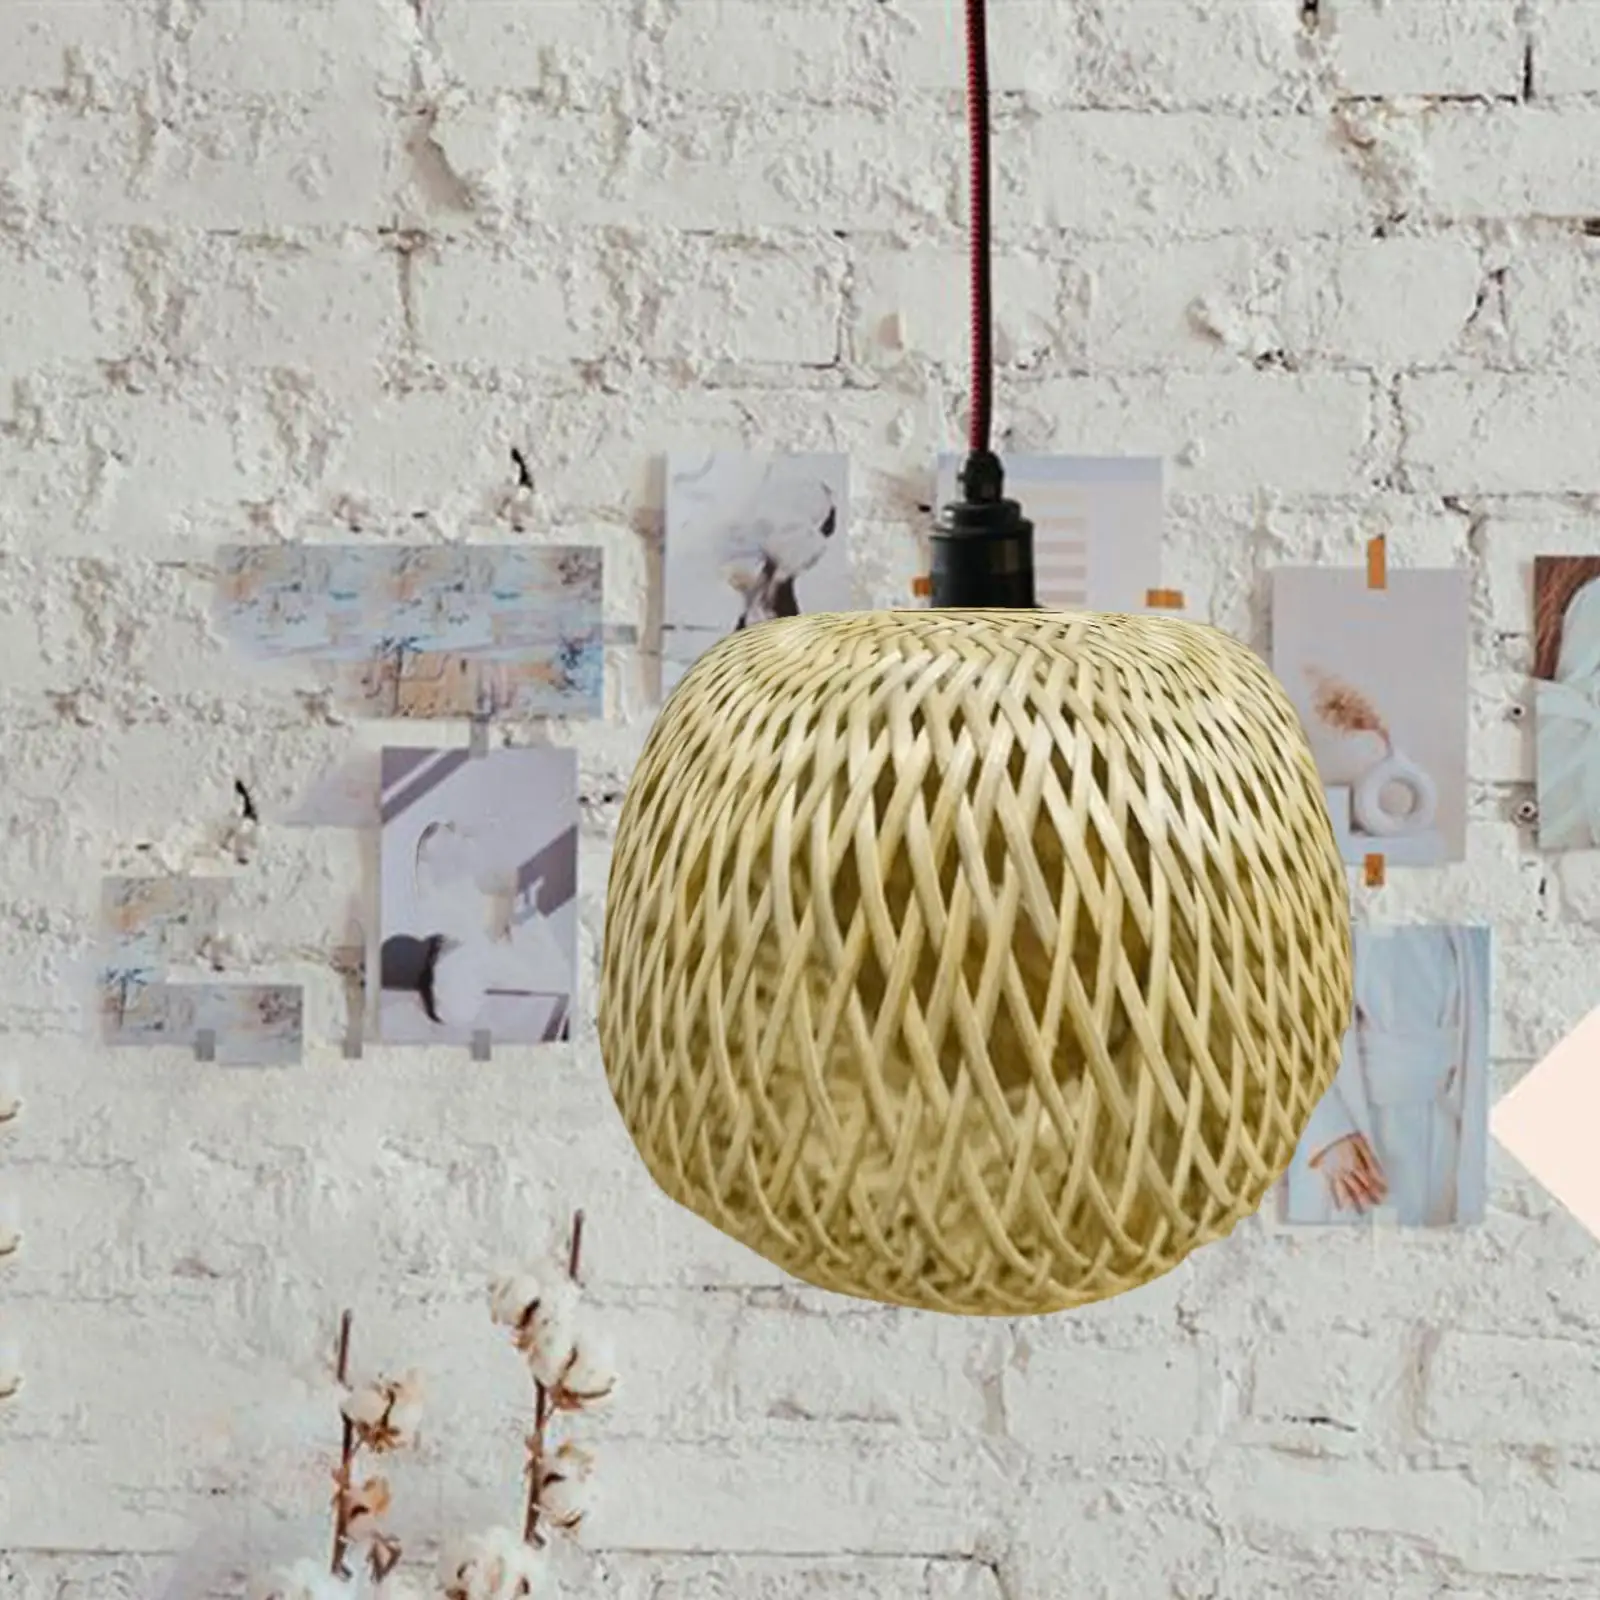 Handmade Weaving Lamp Shade, Ceiling Light Cover Hanging Lampshade for Hotel Cafe Decor